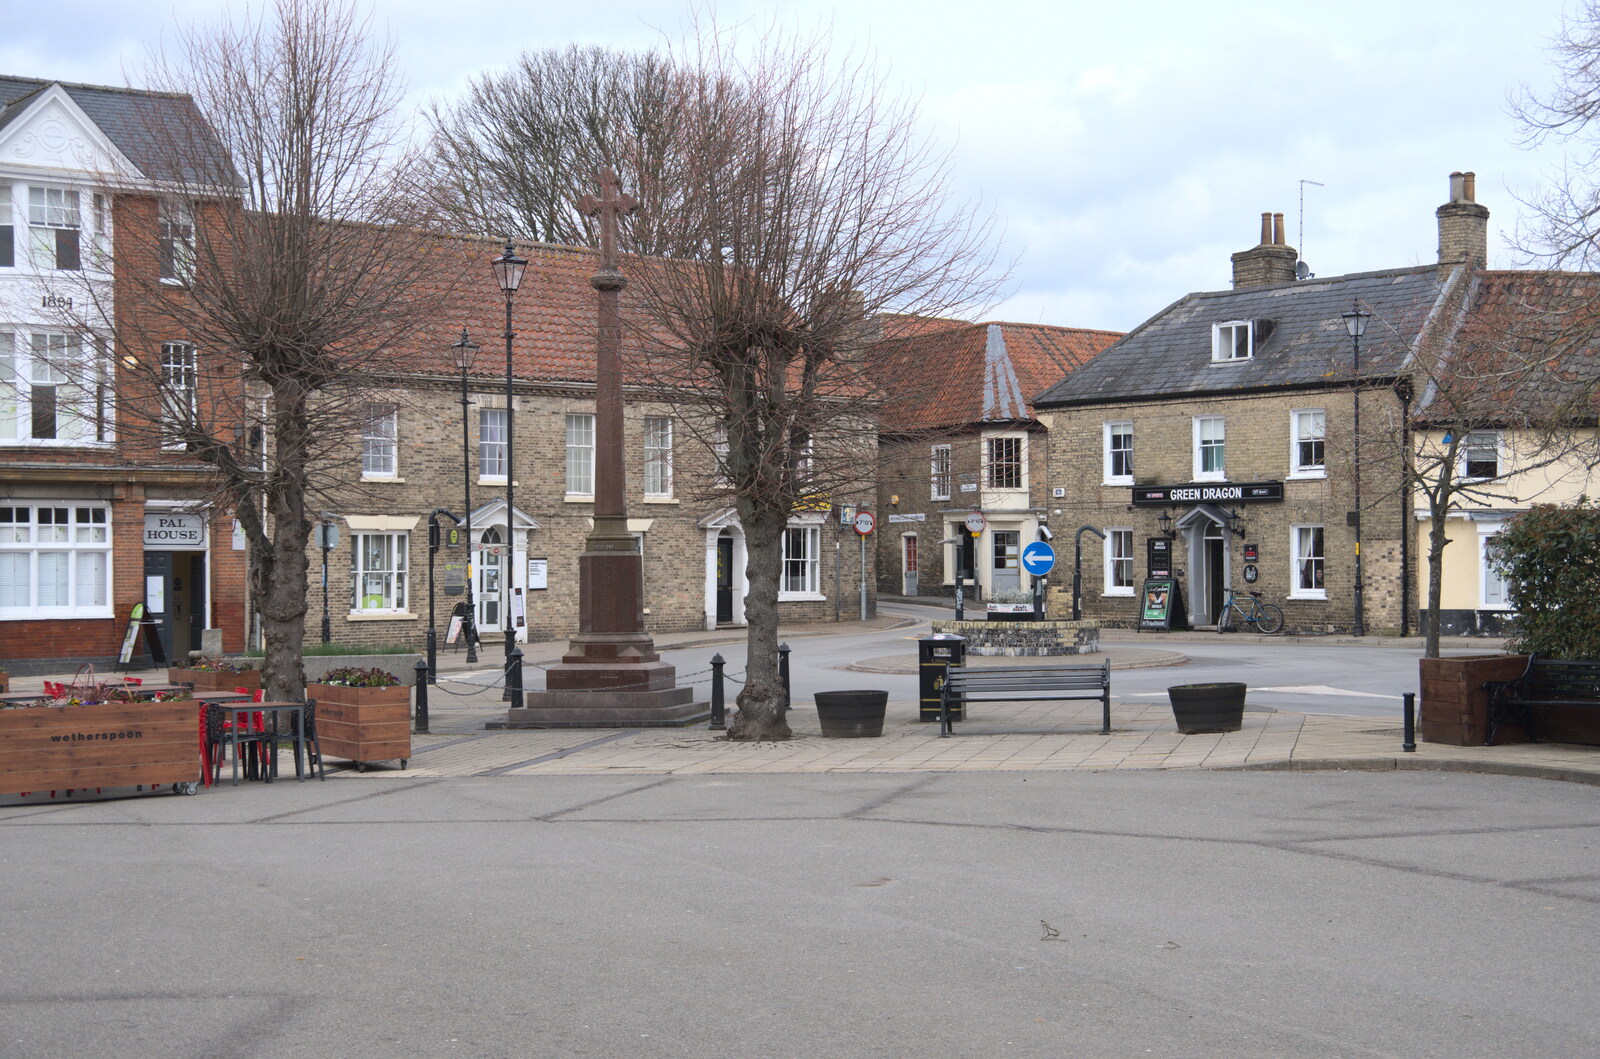 A memorial on the Market Place from A Postcard from Thetford, Norfolk - 15th March 2023